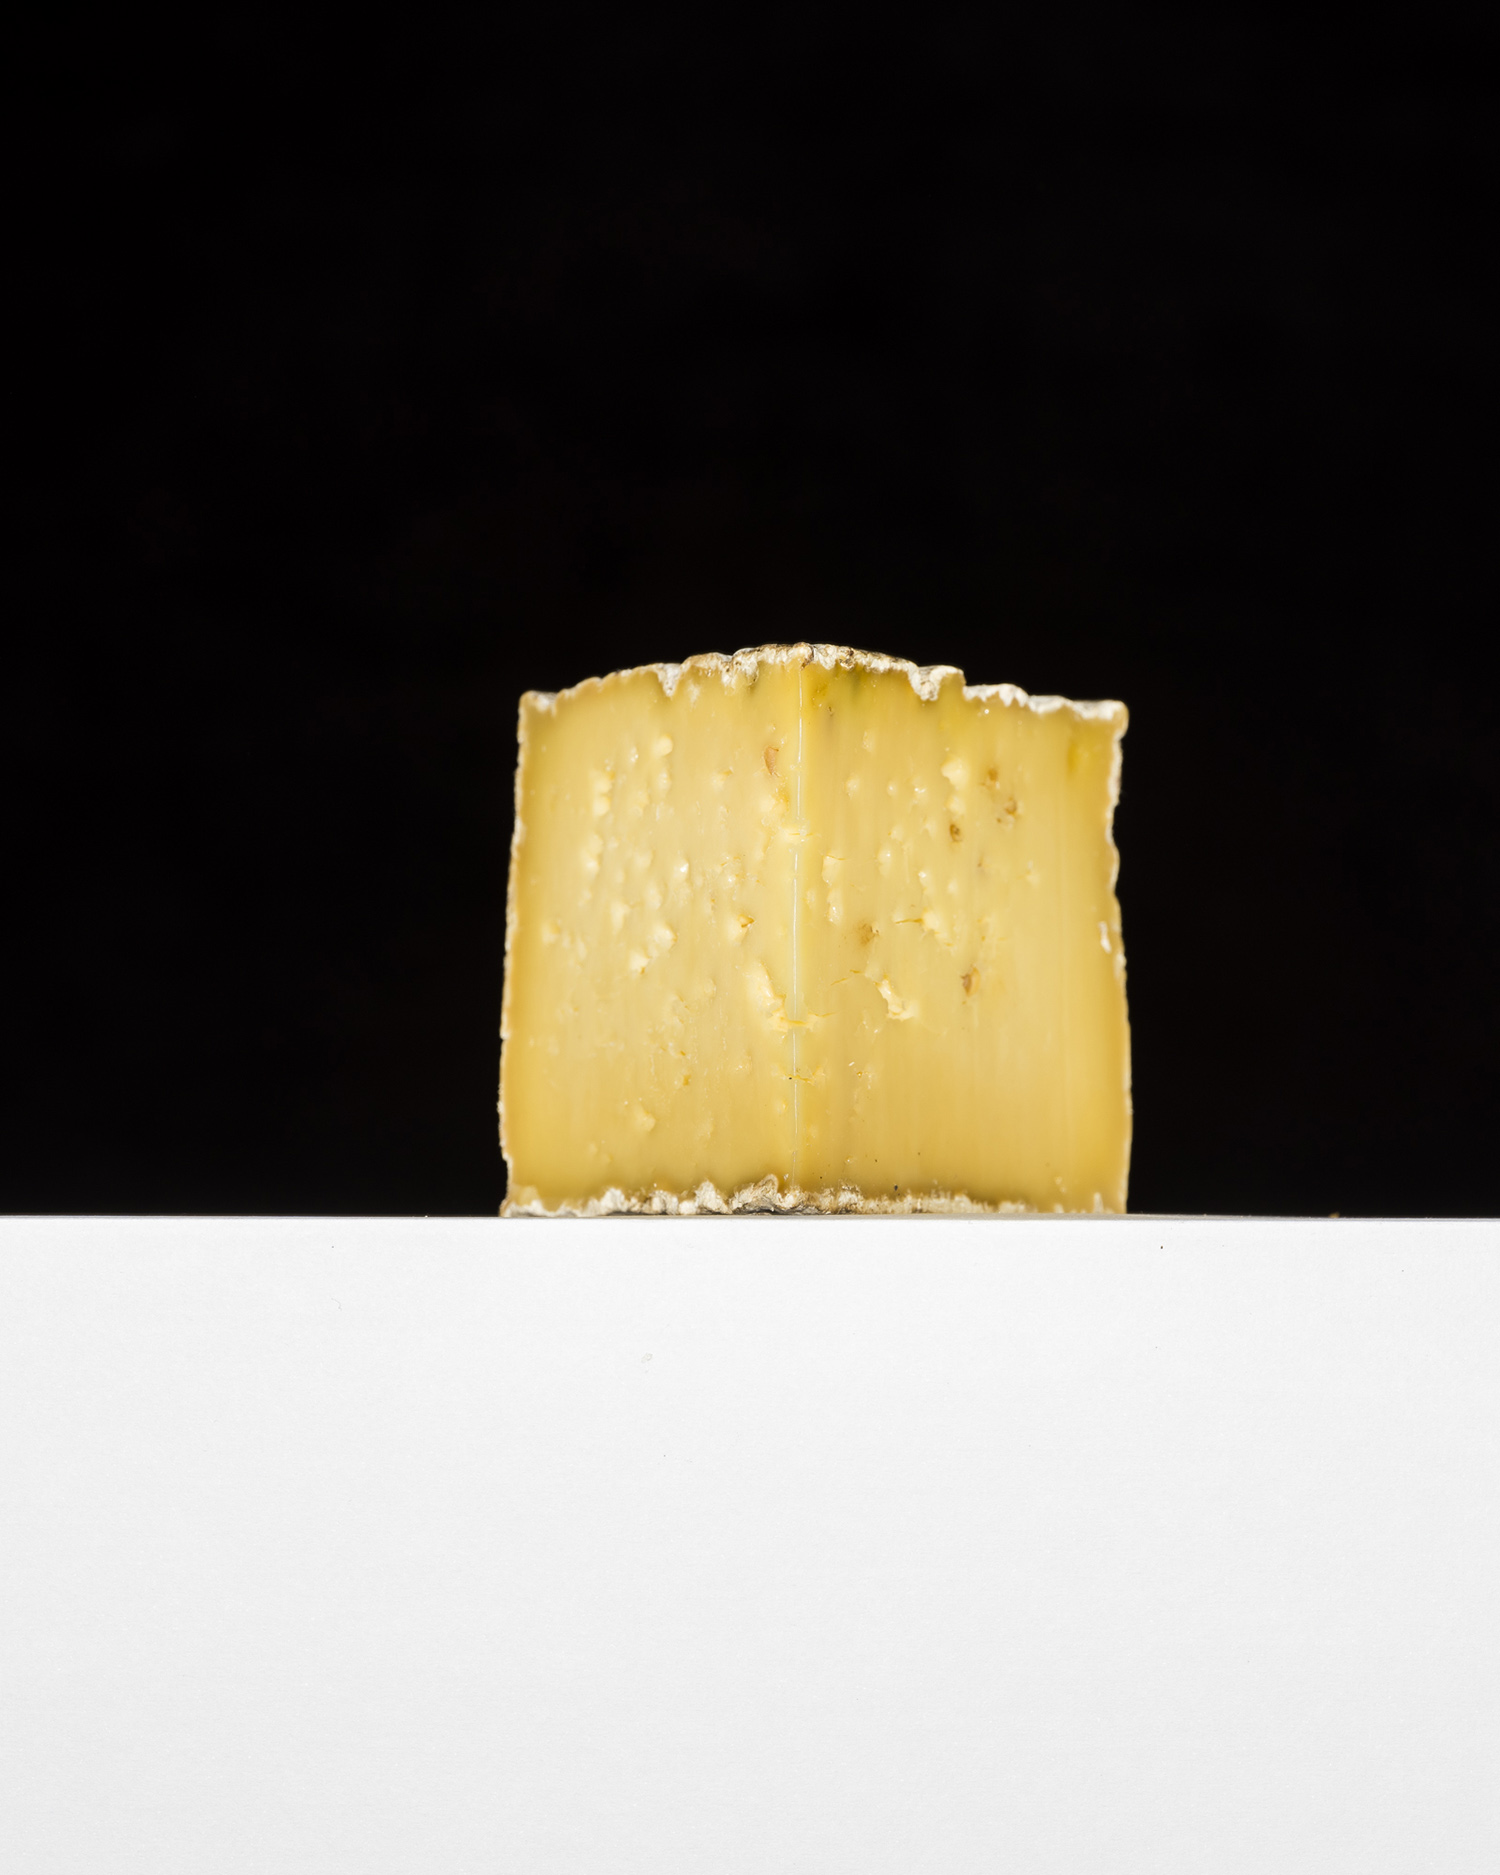 Le fromage d'Alice © Sylvain Gouraud